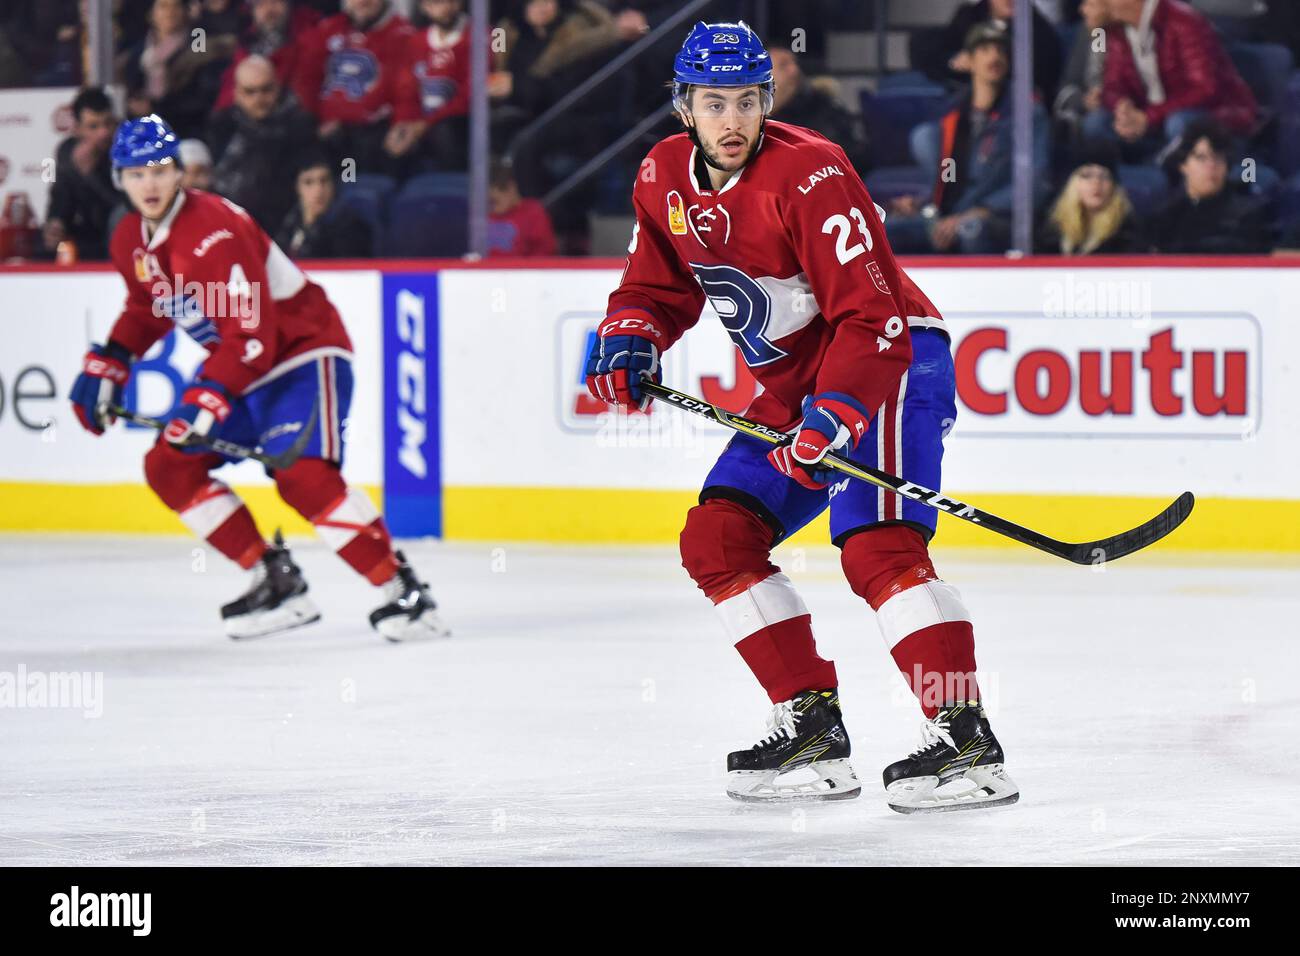 LAVAL, QC - JANUARY 24: Look on Laval Rocket center Niki Petti (23) during  the Syracuse Crunch versus the Laval Rocket game on January 24, 2018, at  Place Bell in Laval, QC (